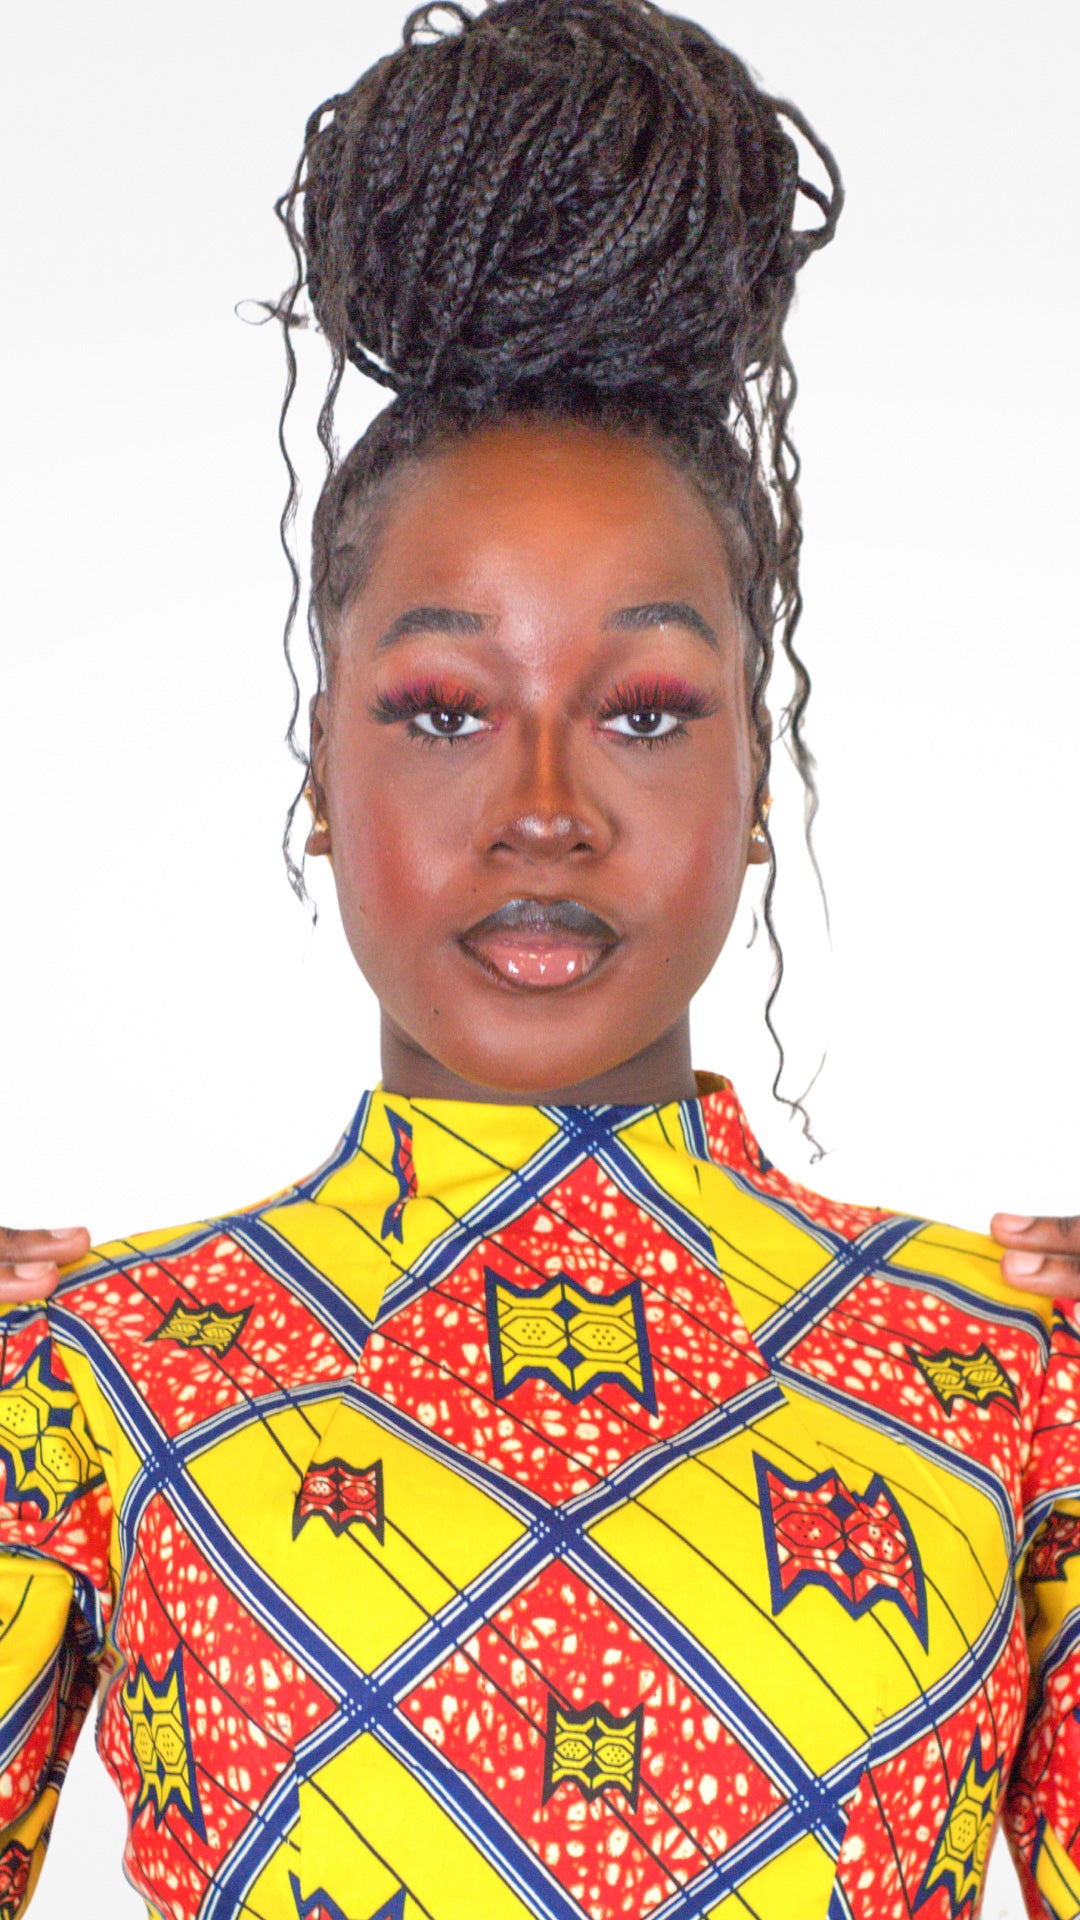 A model wearing red eyeshadow paired with the yellow red print dress.